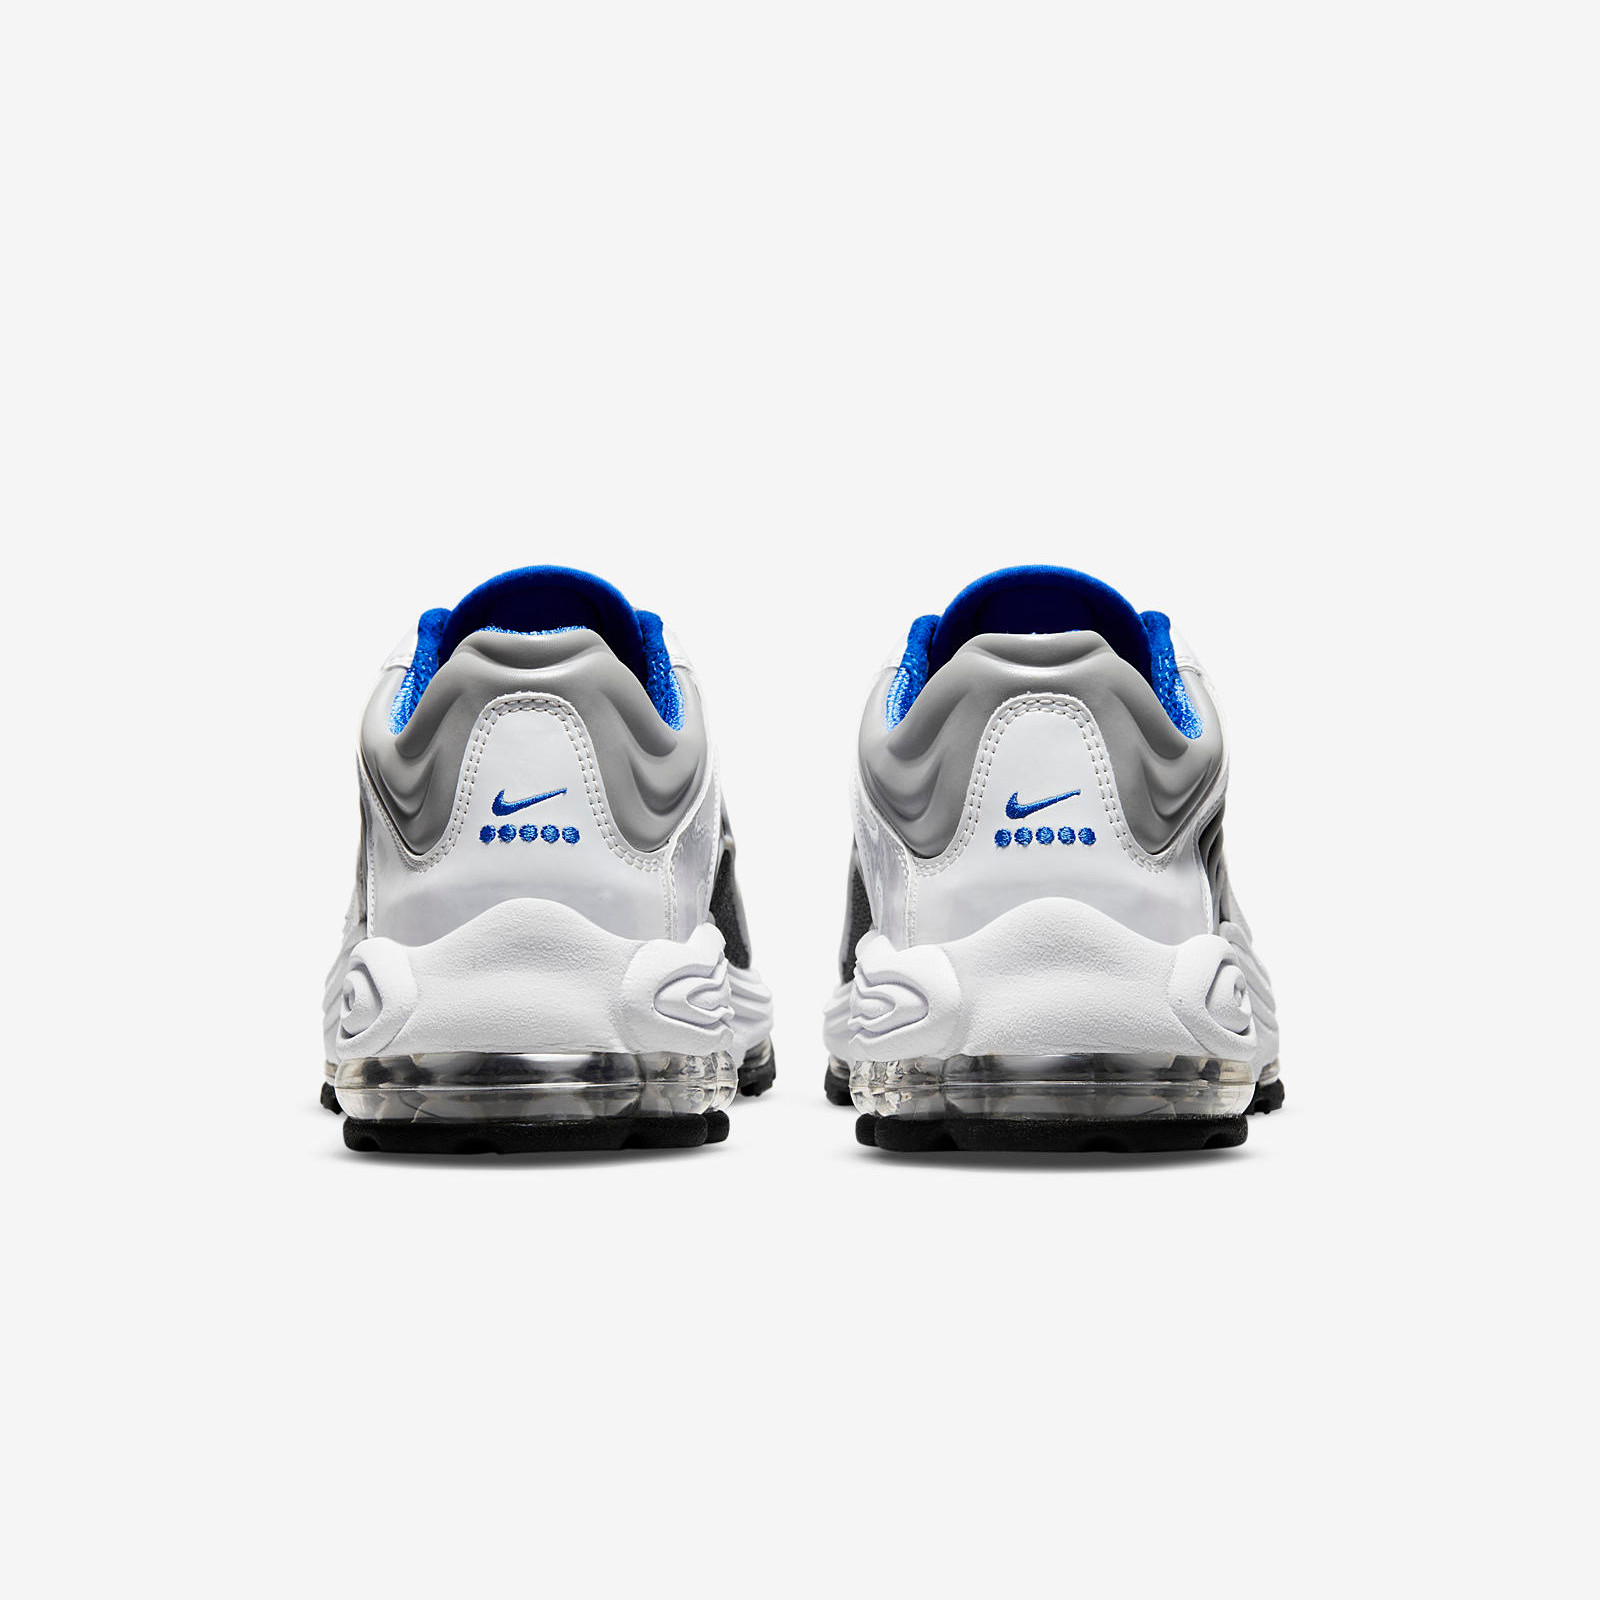 Nike Air Tuned Max
« Racer Blue »